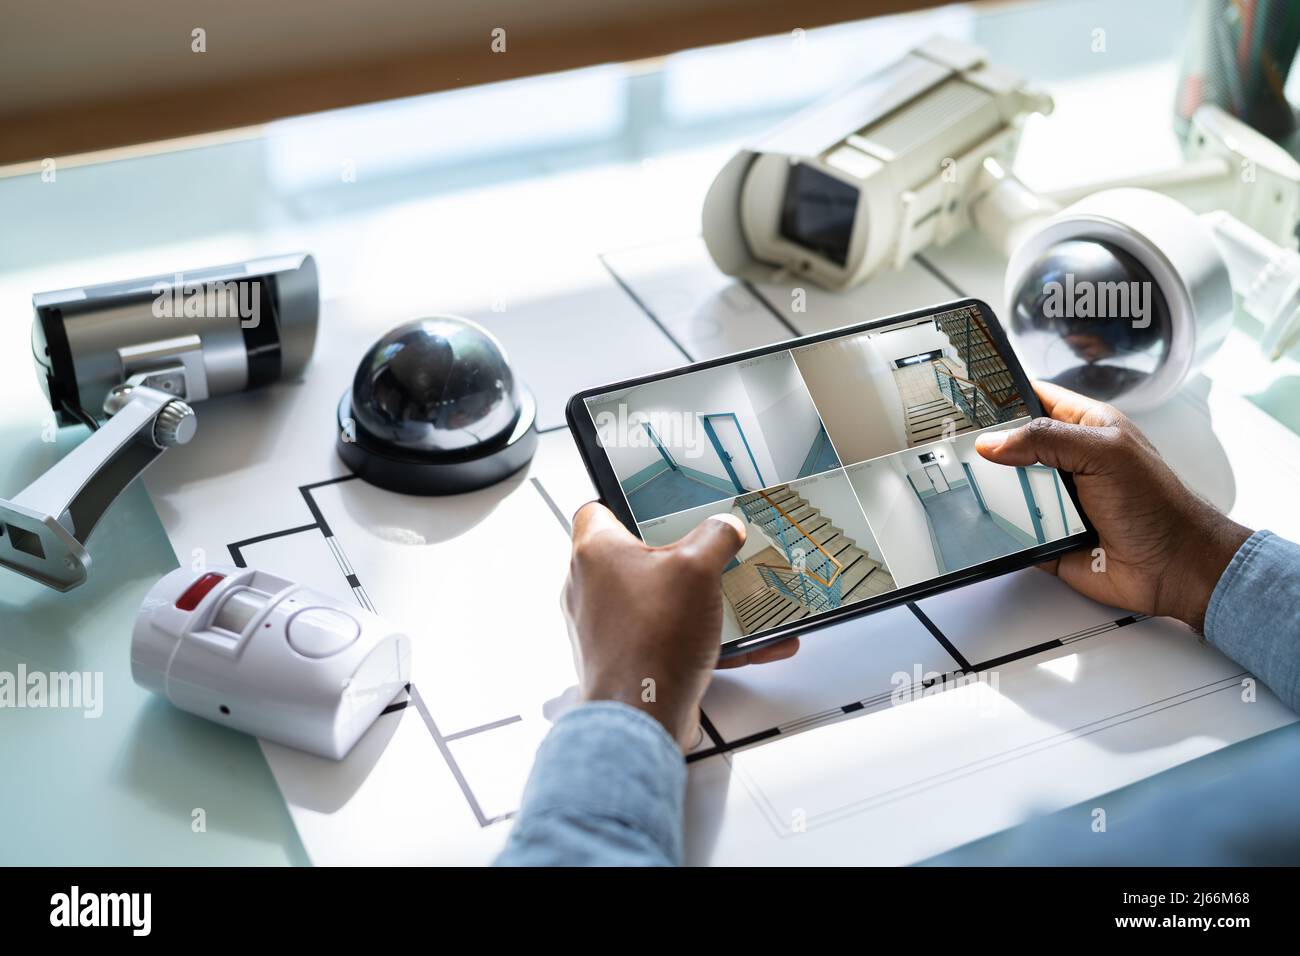 CCTV Security Alarm And Fire Surveillance On Tablet Stock Photo